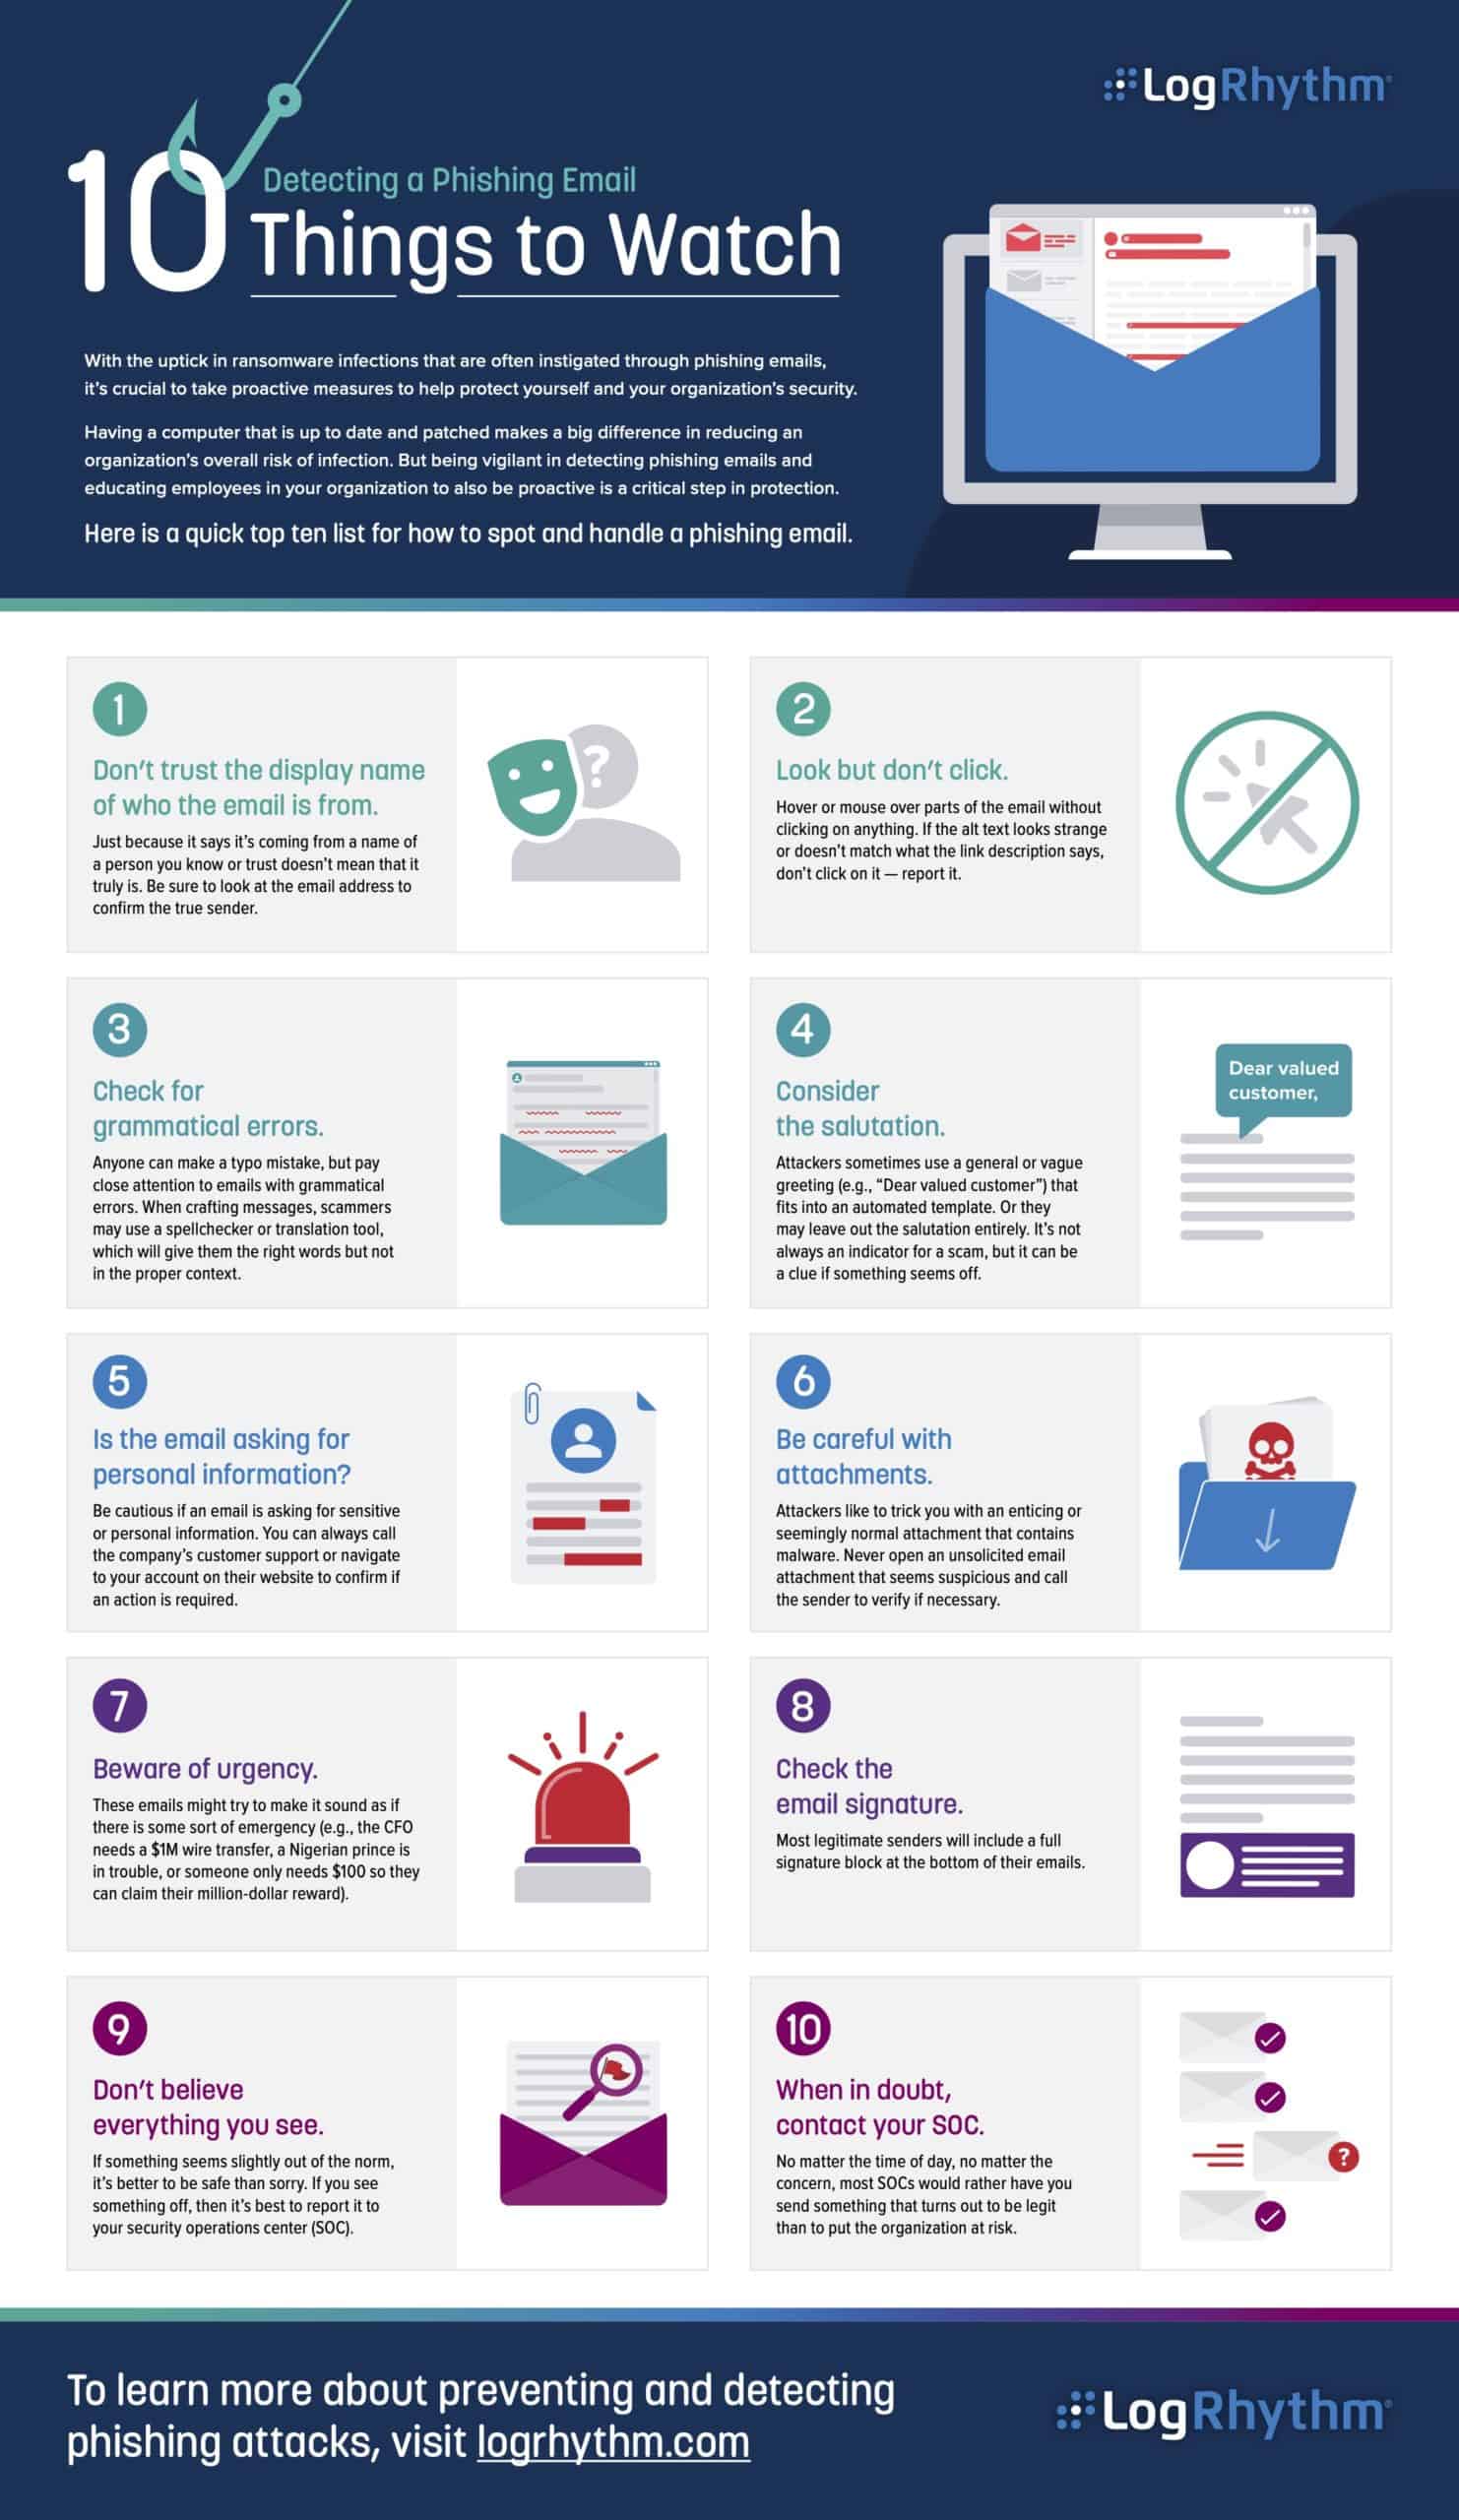 Detecting a phishing email infographic 